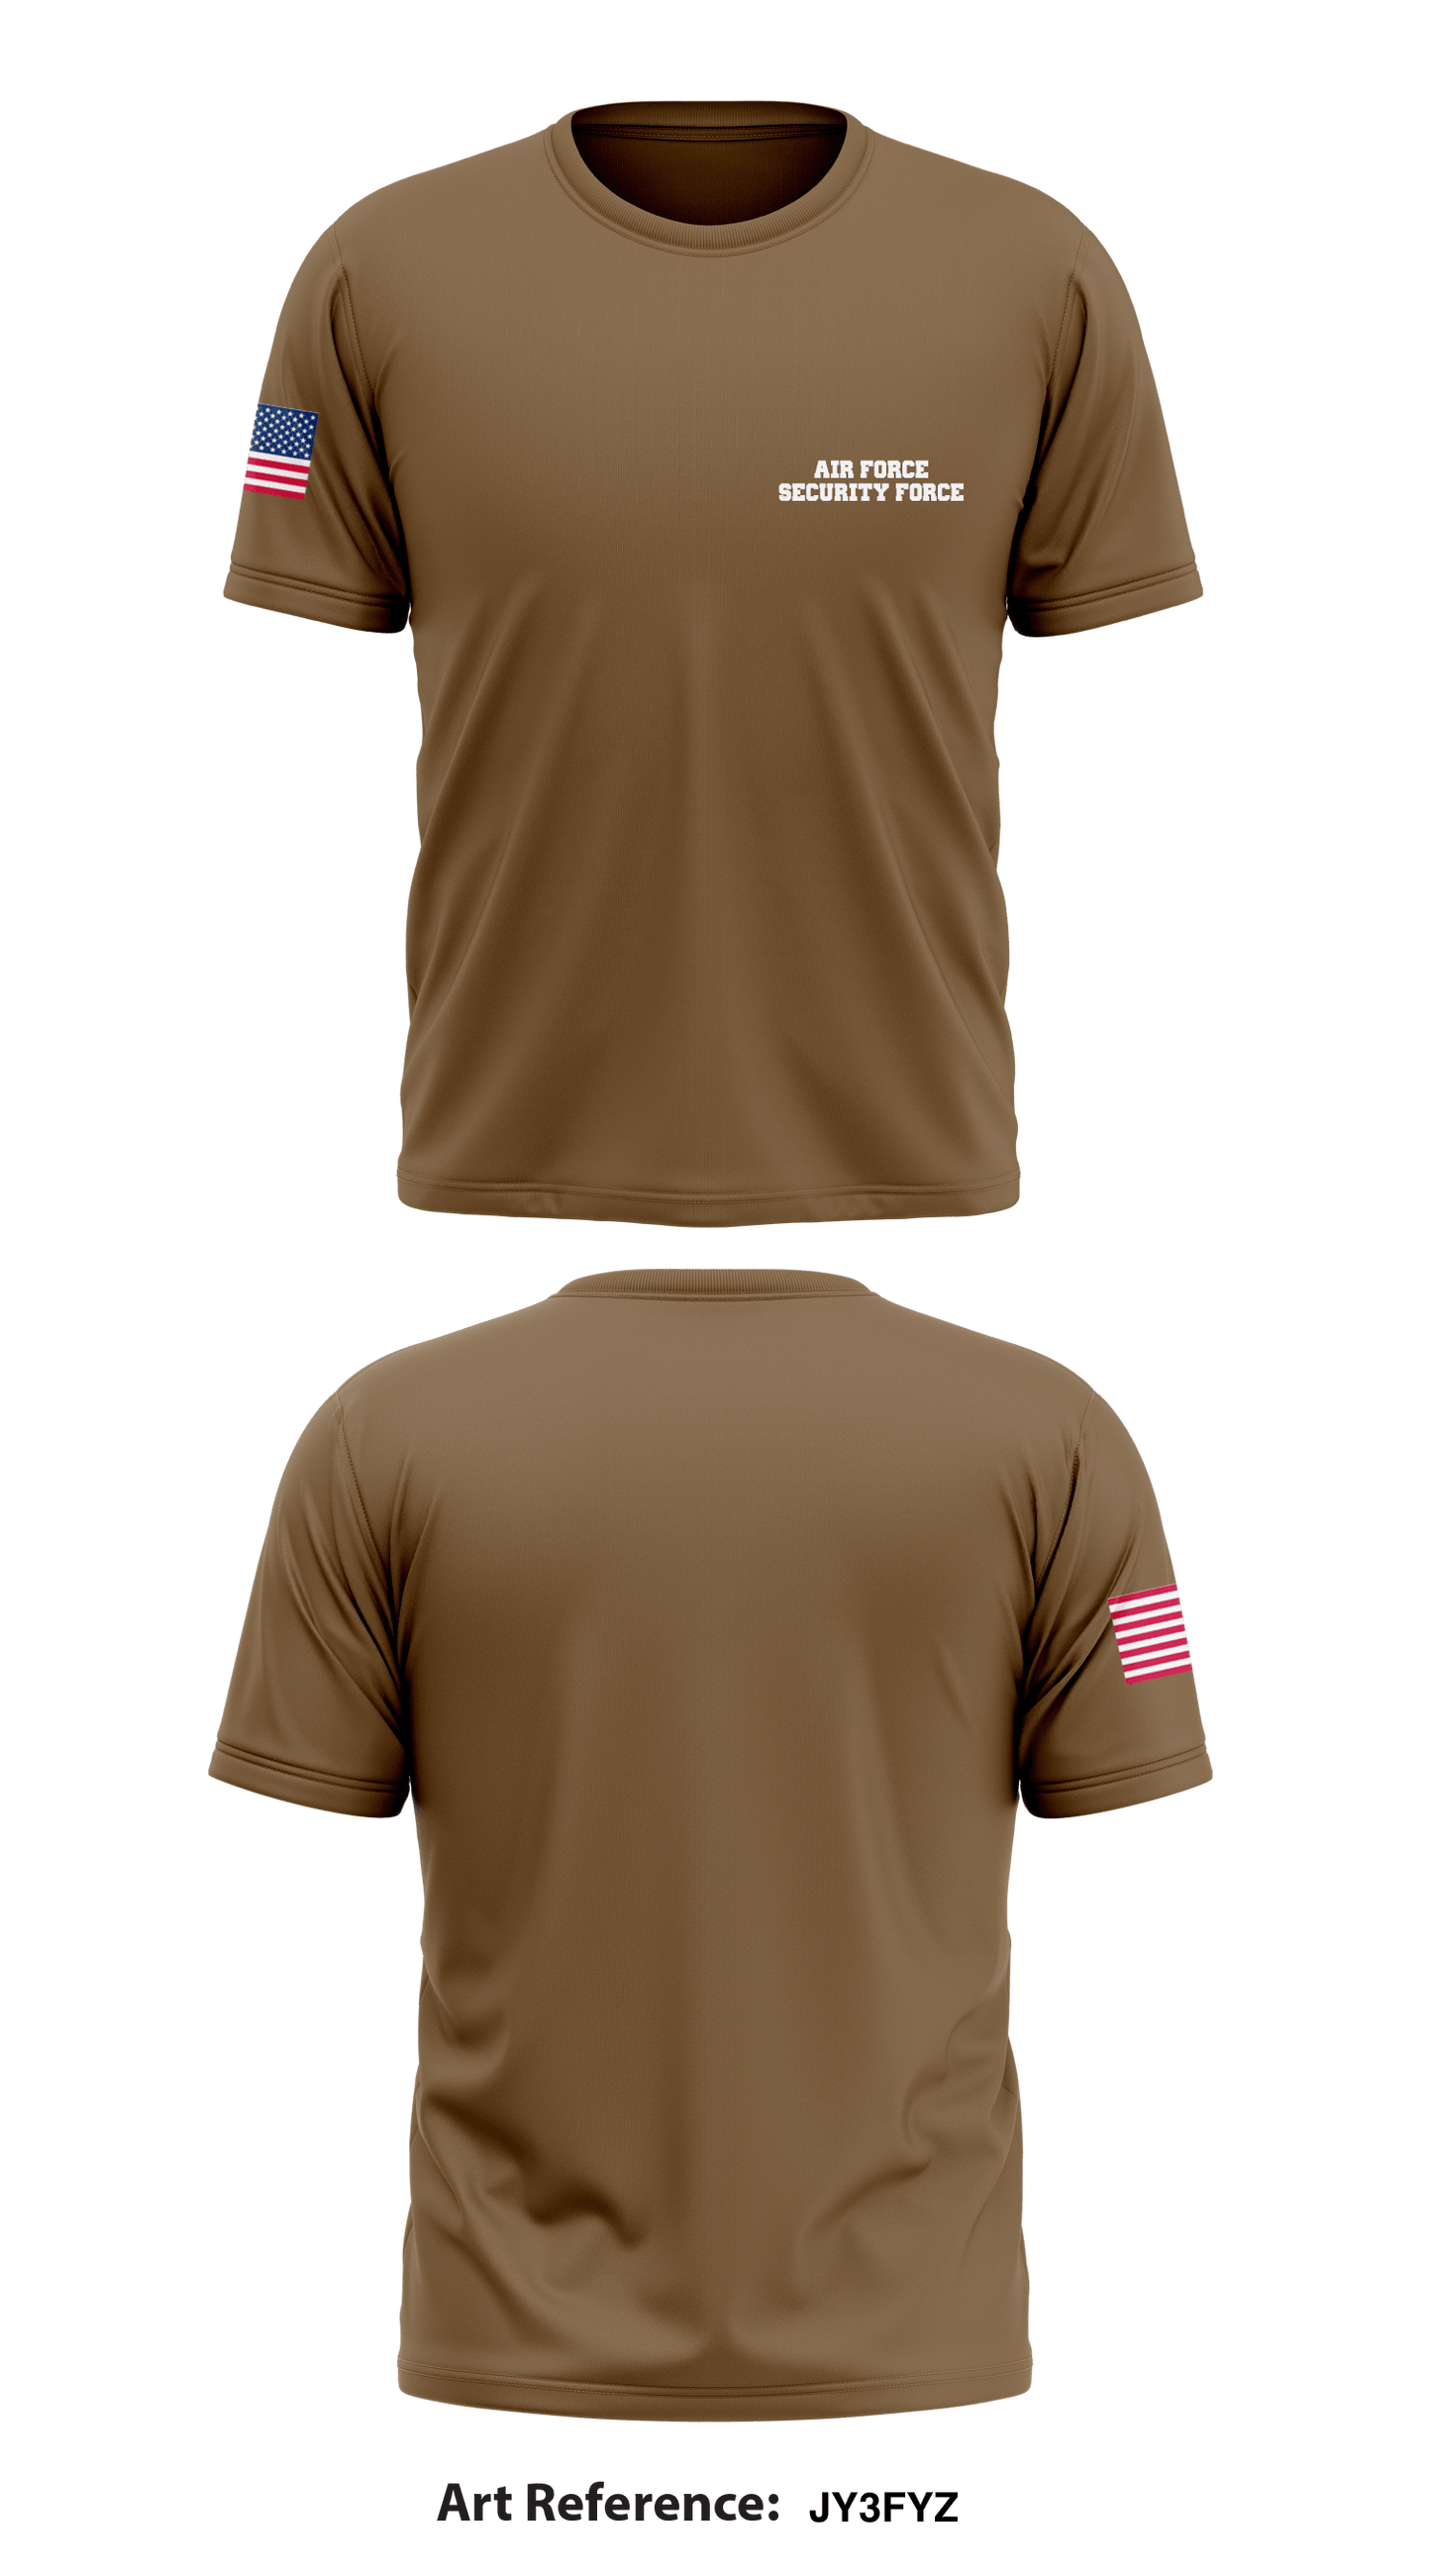 Air force security force1 Core Men's SS Performance Tee - JY3fyz